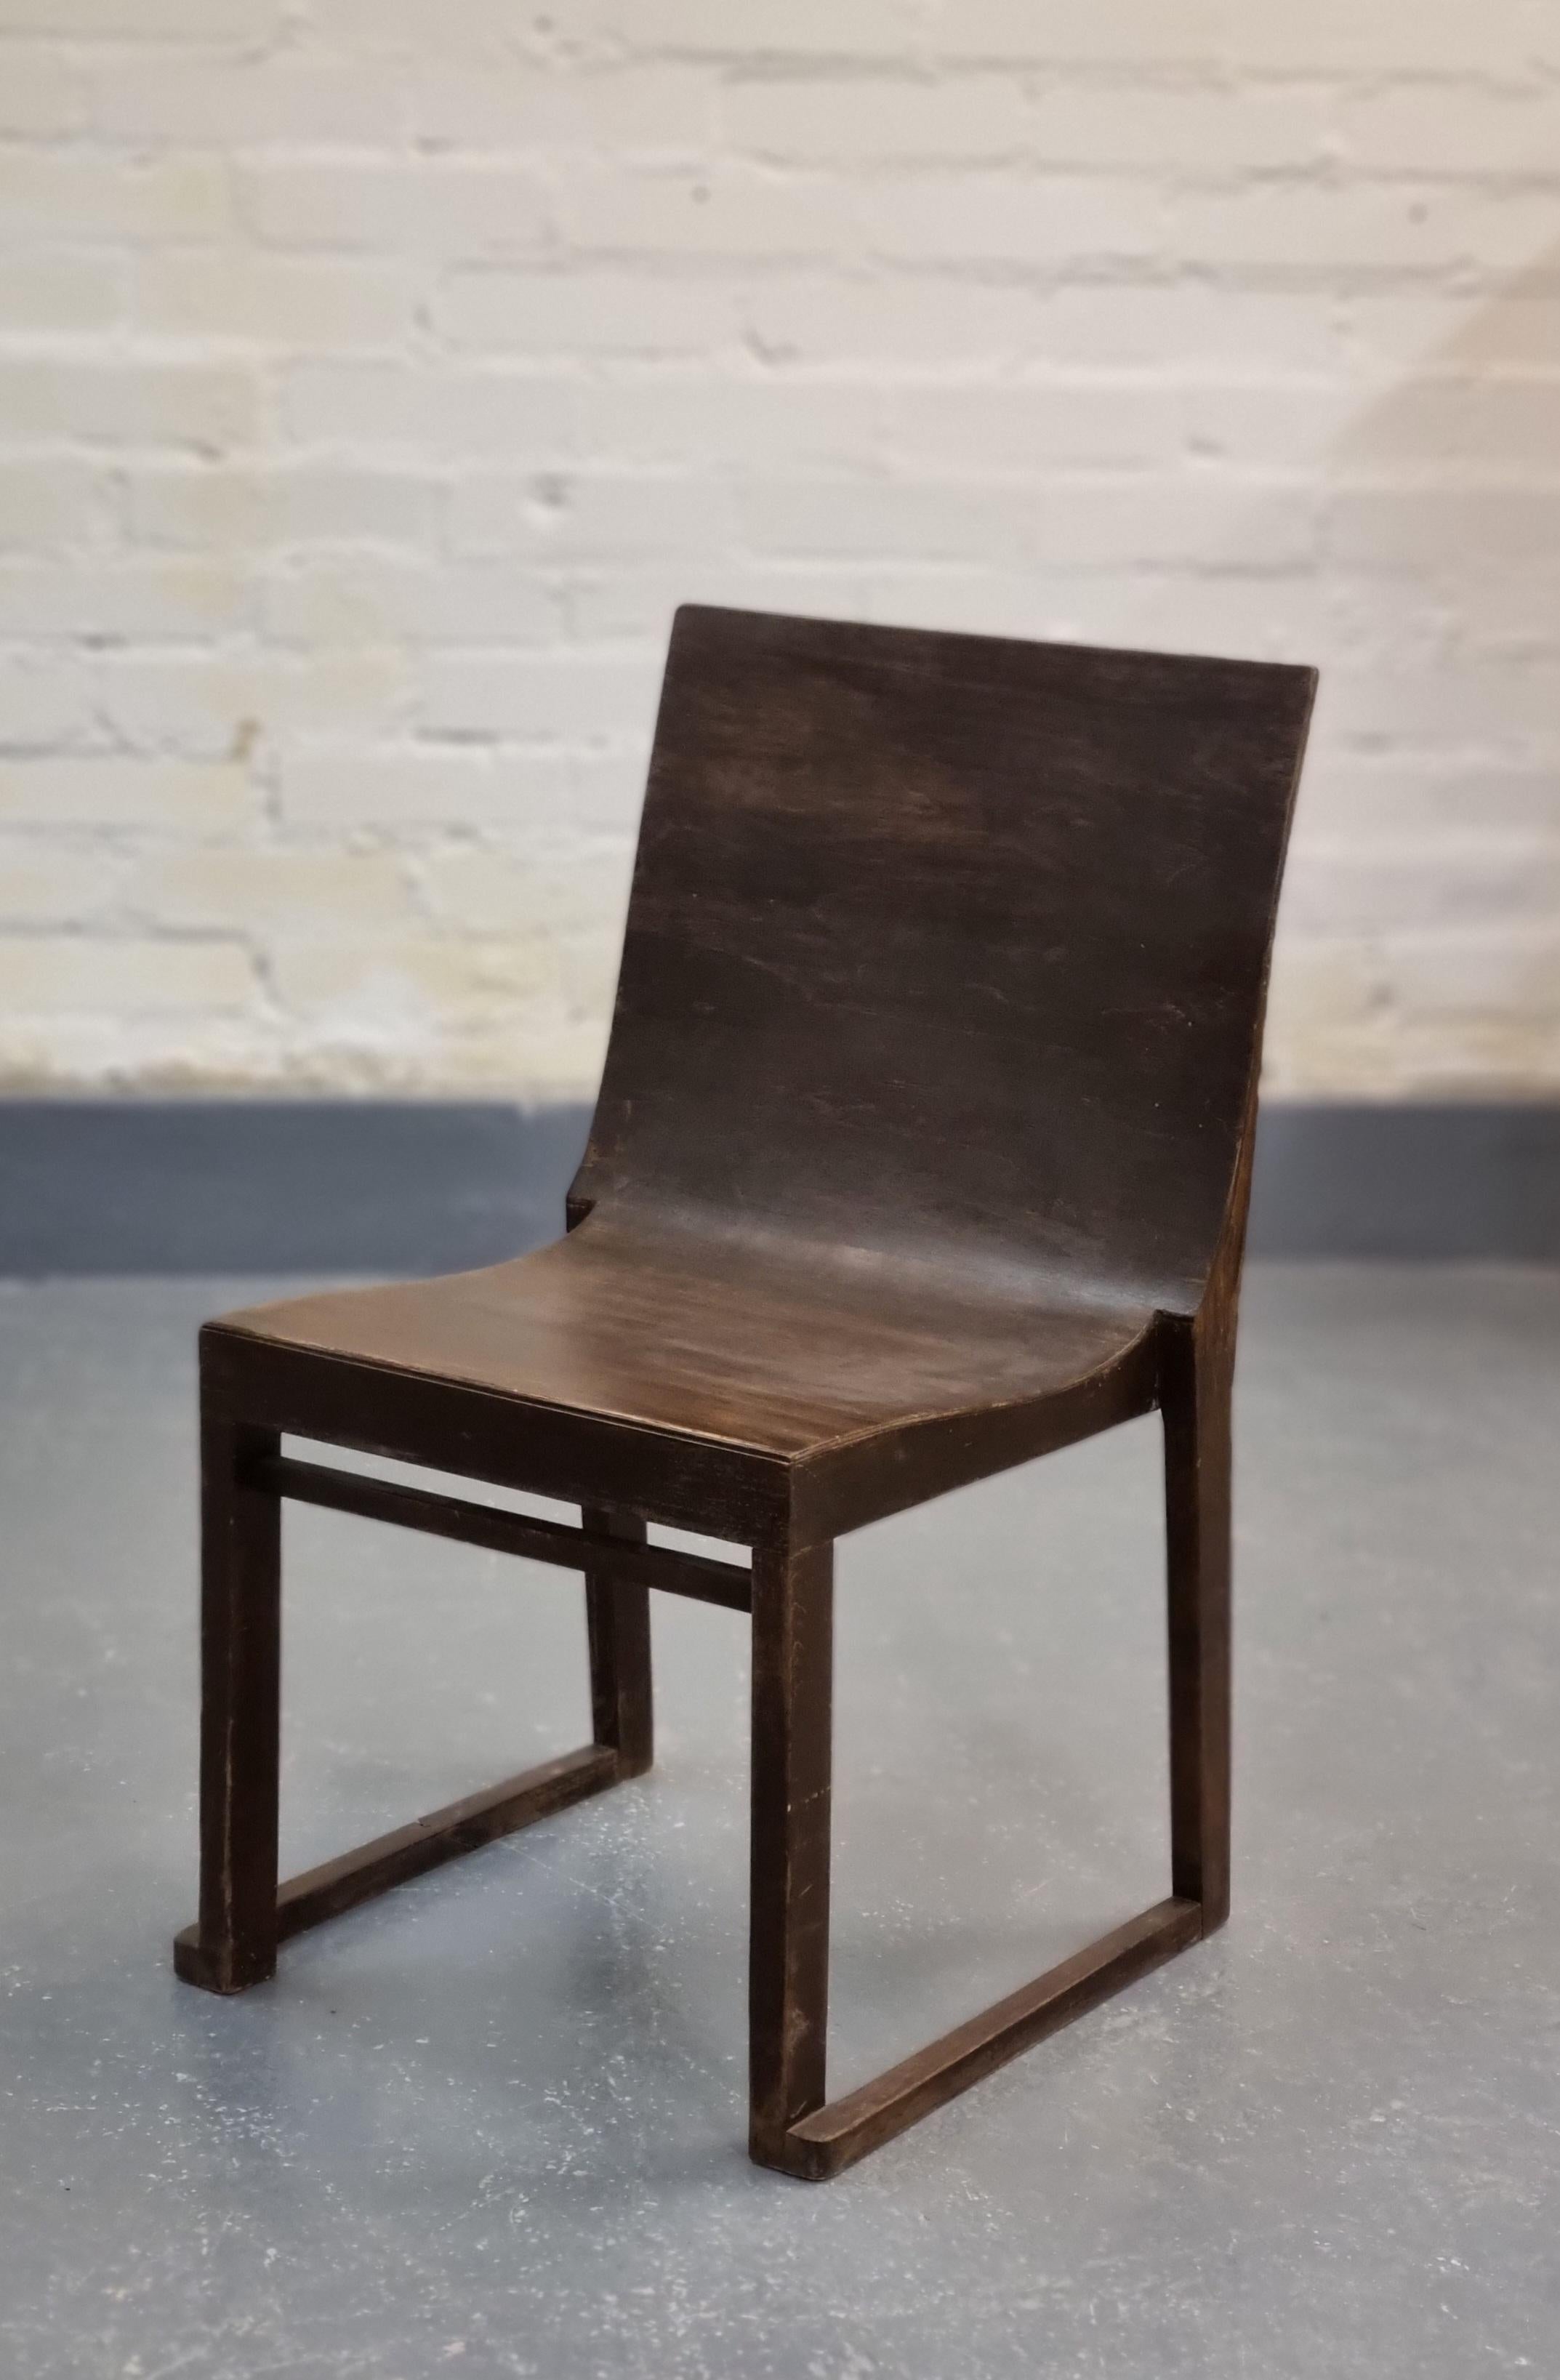 This minimalist functionalist chair known as 